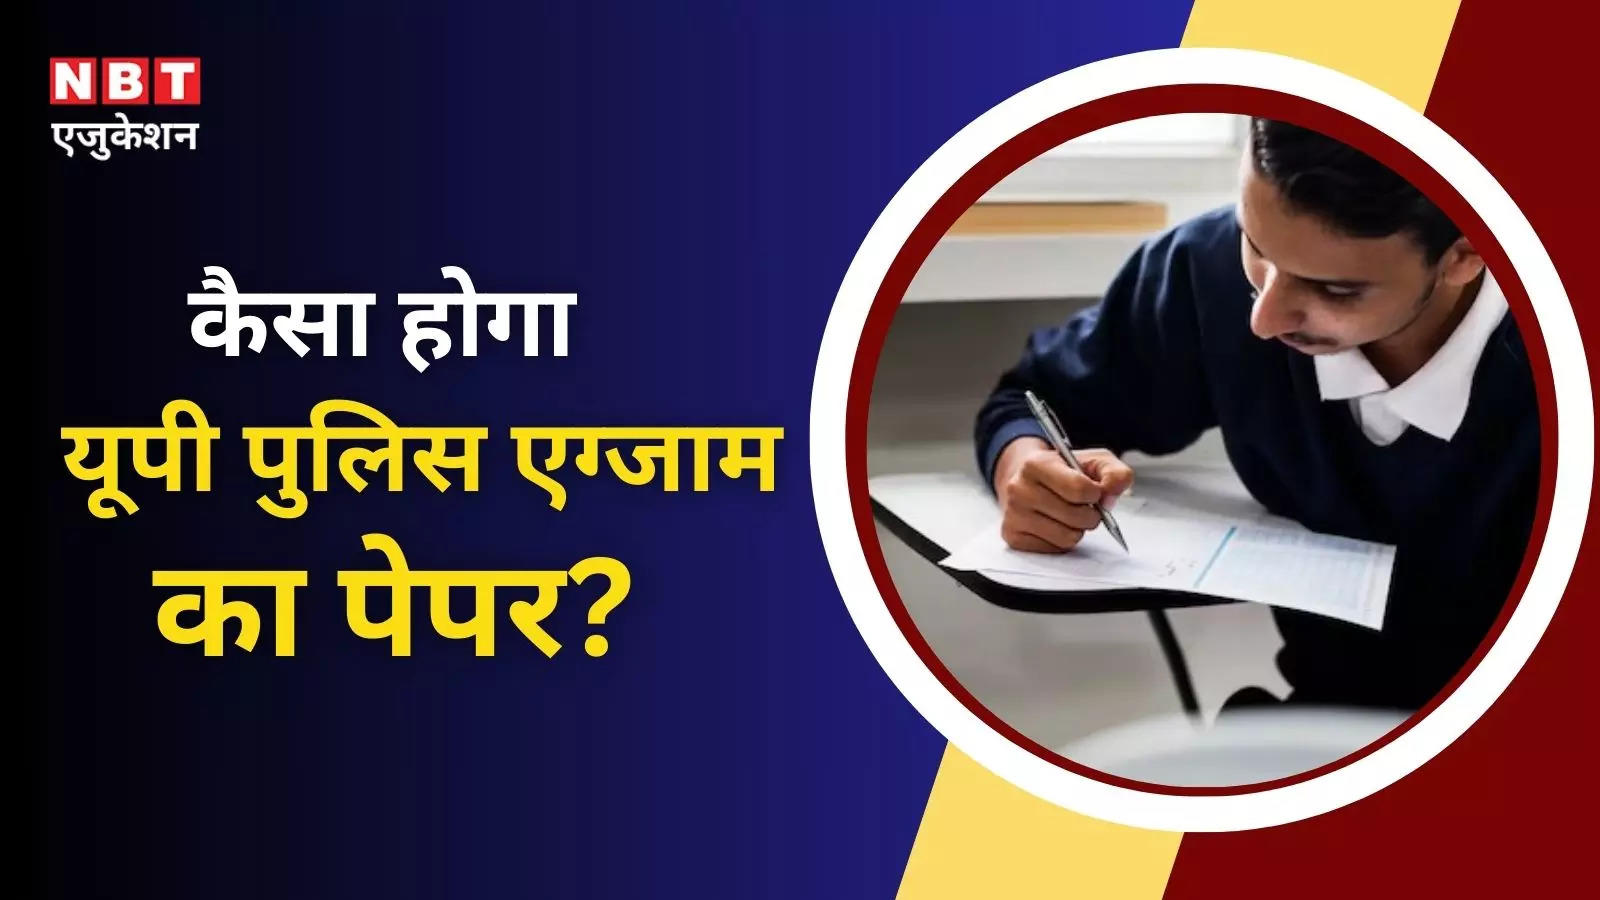 UP Constable Exam Pattern: Which subject will ask the most questions? Check UP Police Constable Exam Pattern